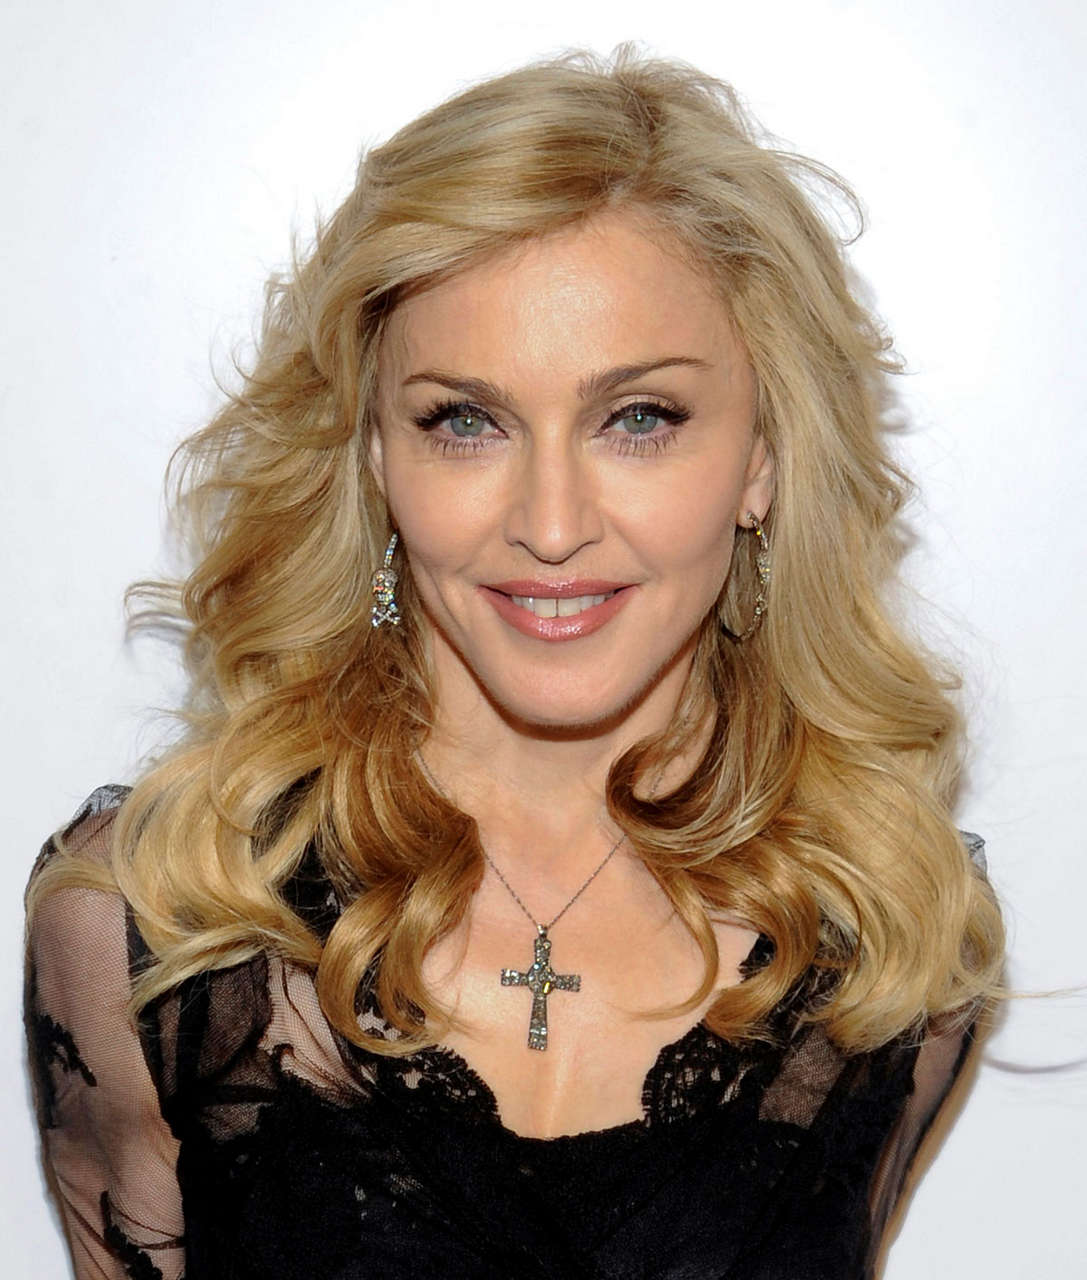 Madonna Truth Or Dare By Madonna Fragrance Launch Macys Herald Square New York